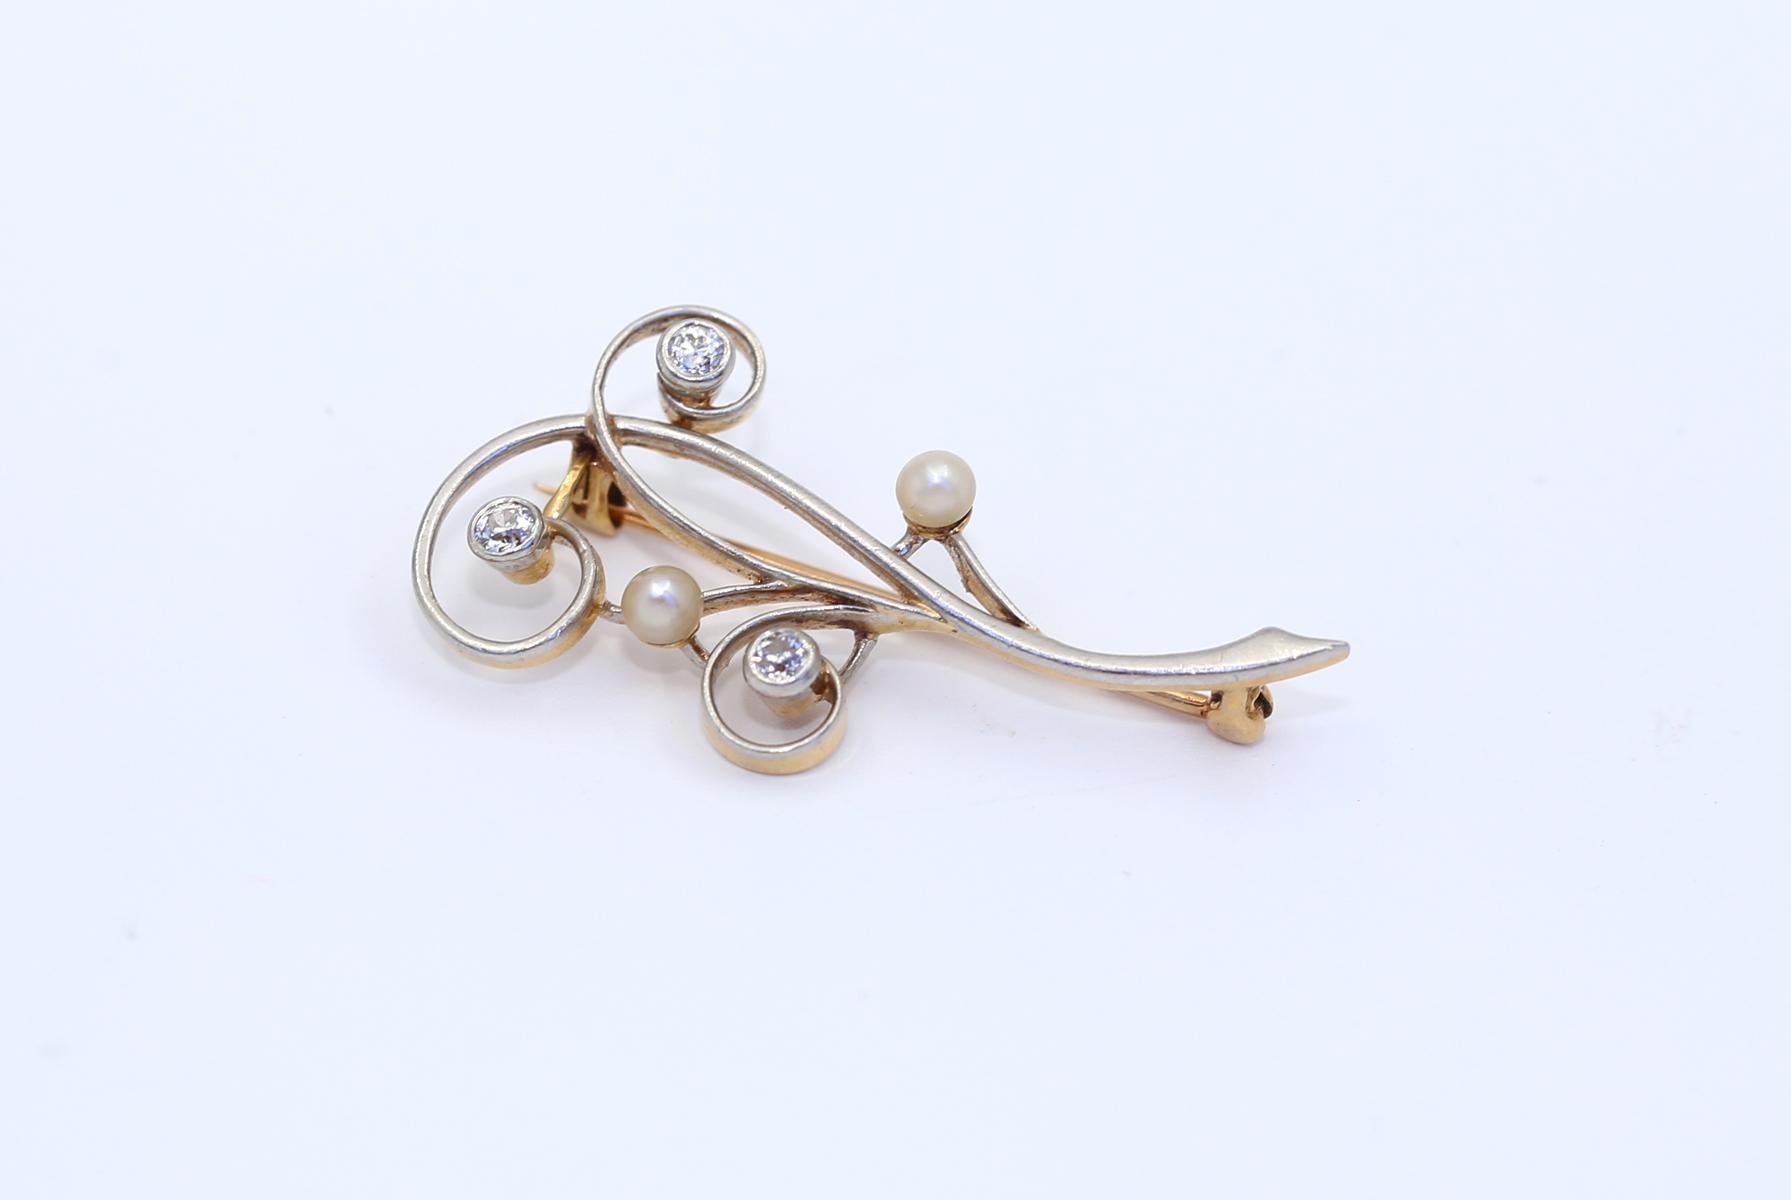 Platinum Gold Old-Mine Diamonds Pearl Brooch. Created around 1930.
Platinum and Gold Old-mine cut Diamond and Pearl swirling brooch. Delicate and elegant brooch depicting a natural branch. There round cut Diamonds and two natural white Pearls.